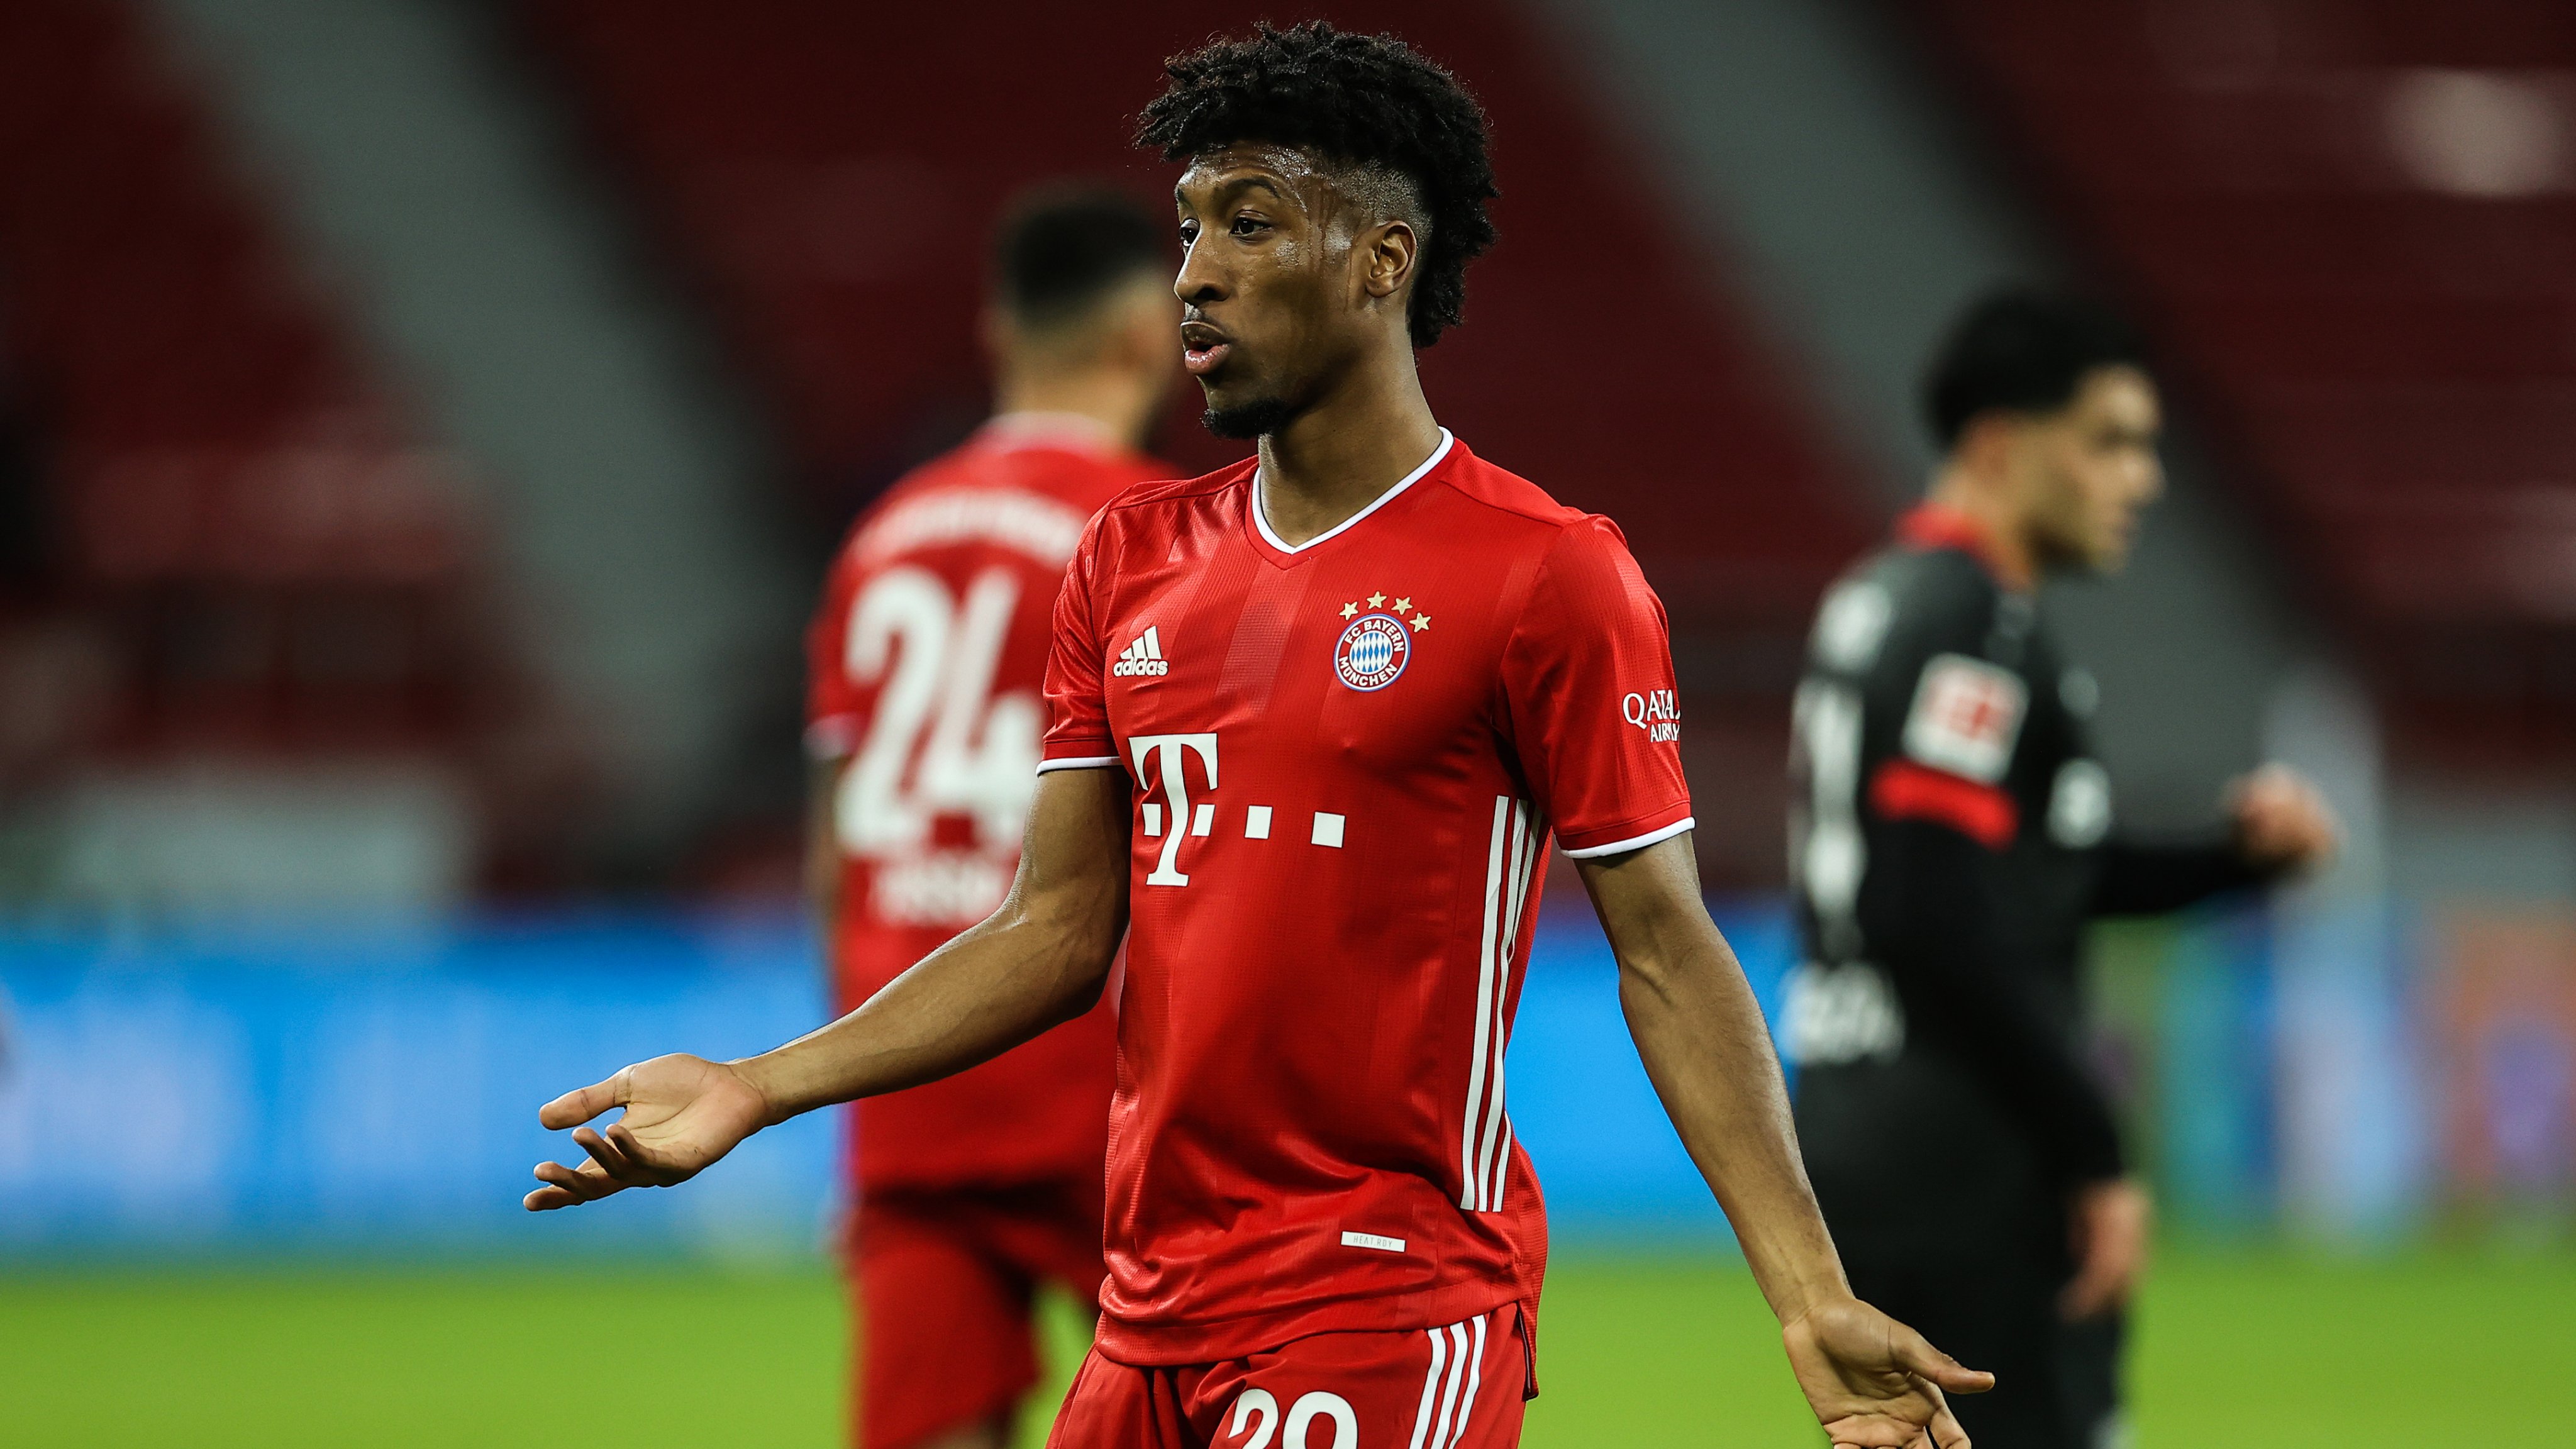 Reports | Kingsley Coman poised to sign contract extension until 2027 with Bayern Munich